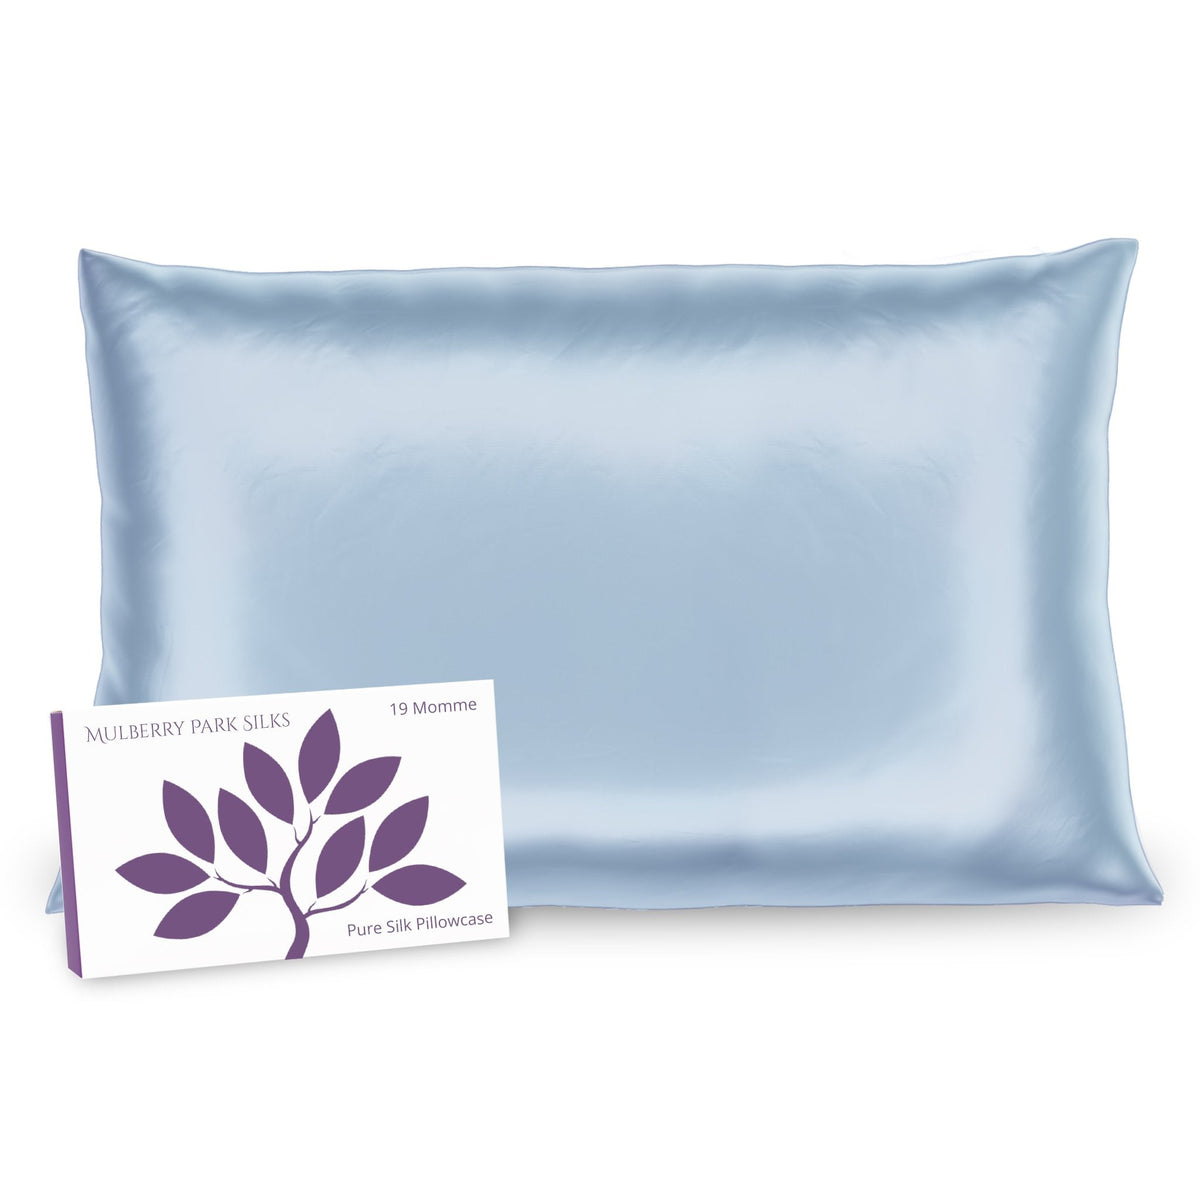 Mulberry Park Silks Deluxe 19 Momme Pure Silk Pillowcase in Blue Color with Box